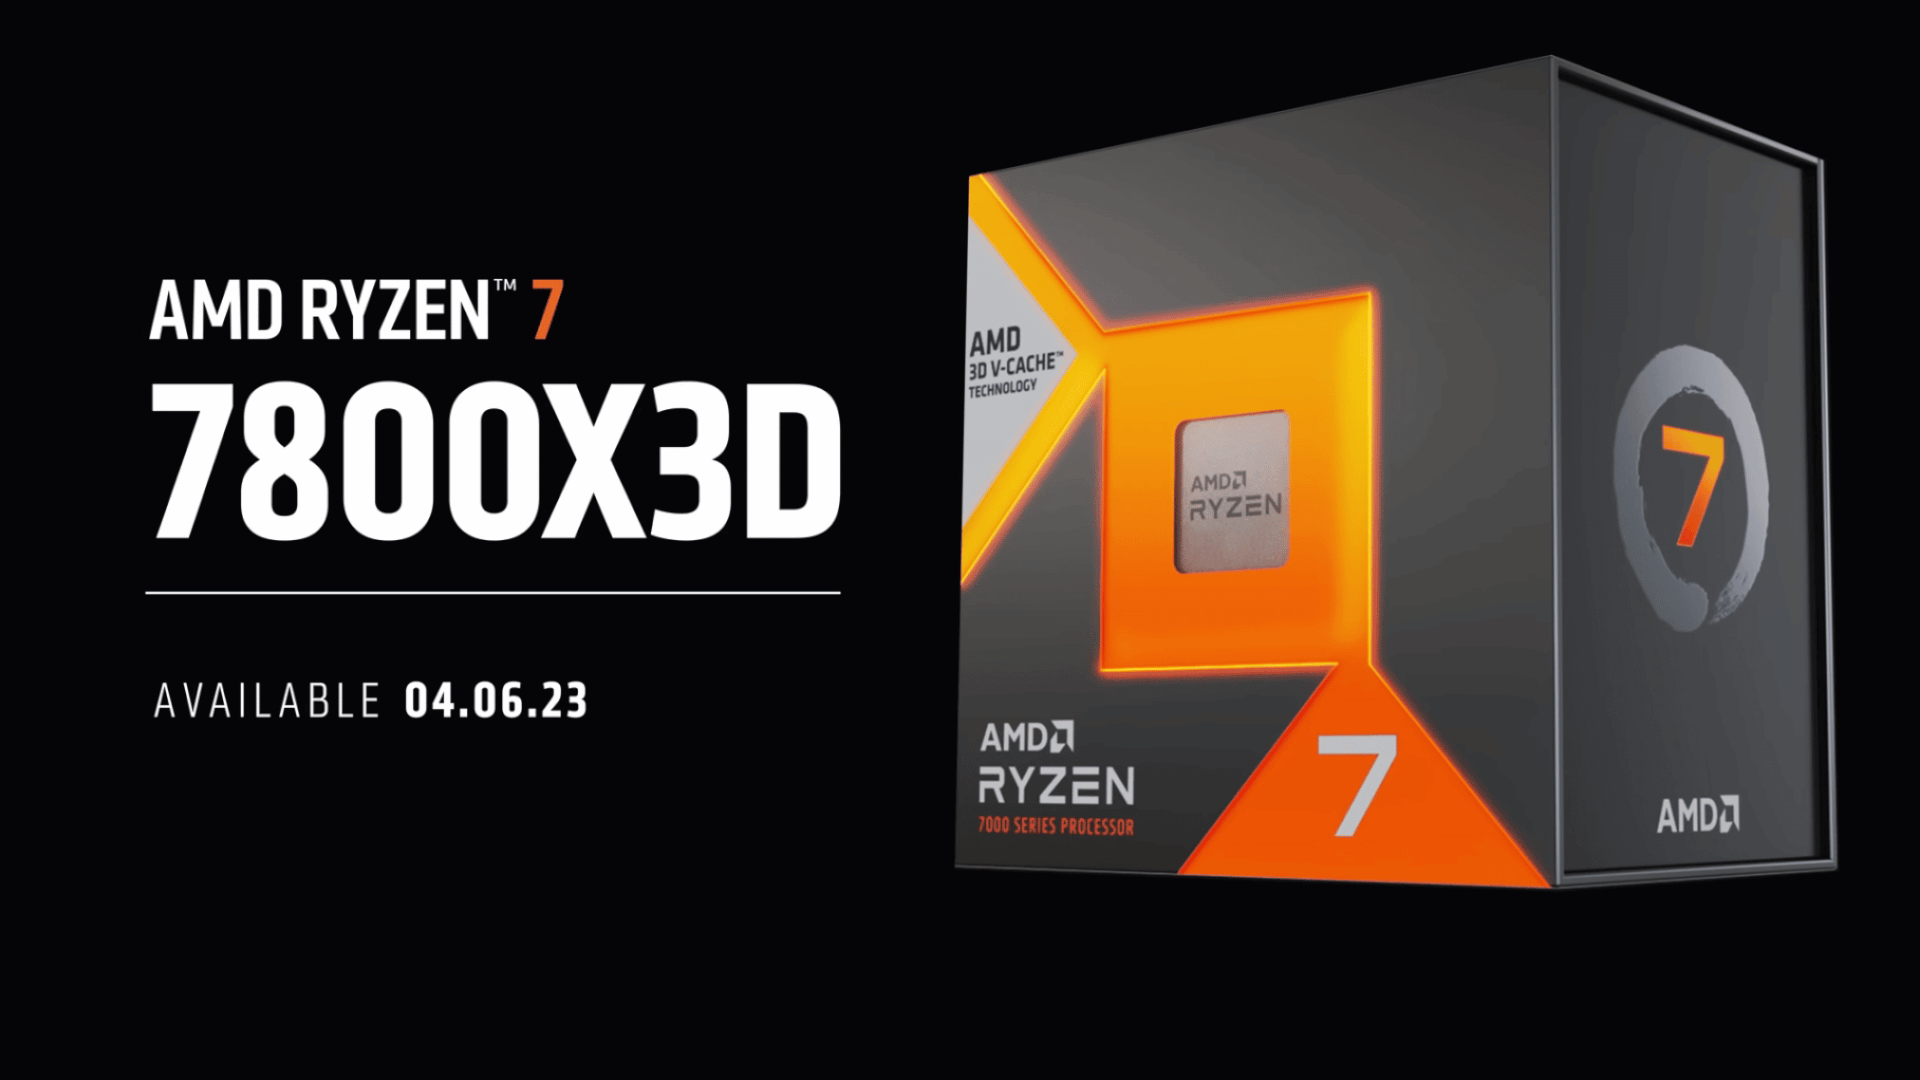 Amd Ryzen 7 7800X3D Up To 24% Faster Than Intel'S Core I9-13900K: Official  Gaming Benchmarks | Hardware Times